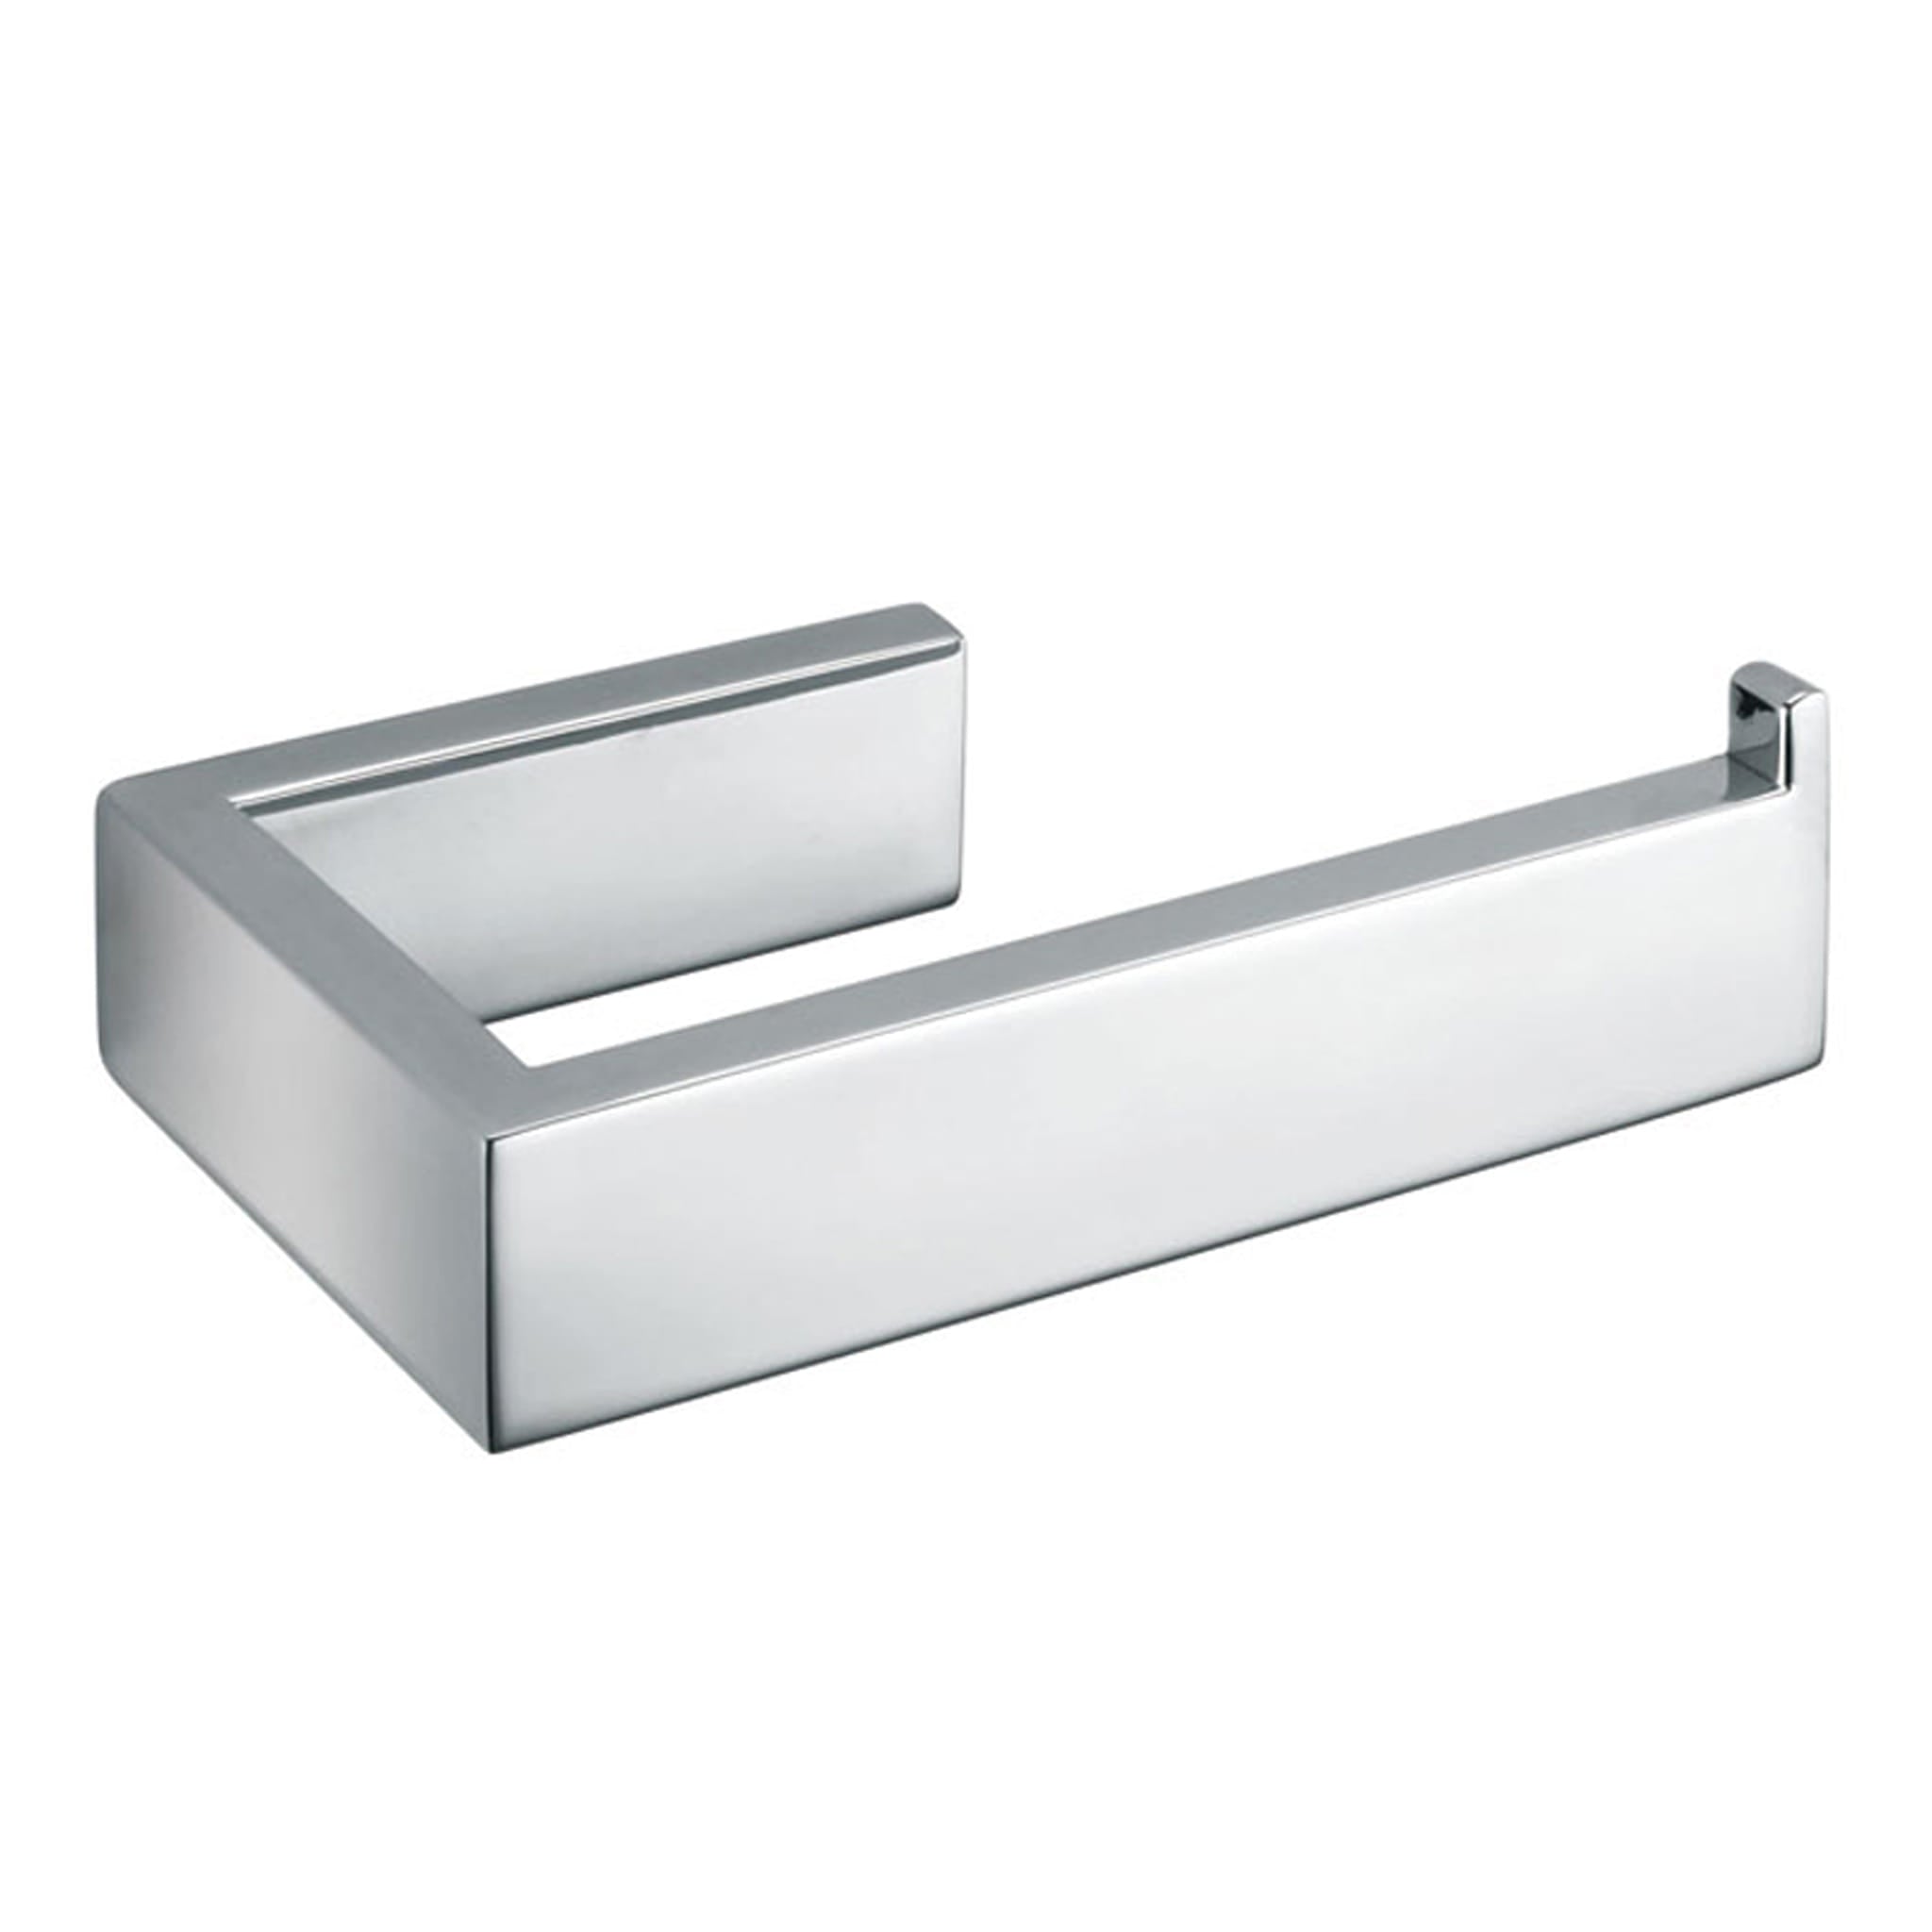 Aquamoon A34 Toilet Paper Holder 6" Wall Mounted Accessory Brushed Nickel Finish